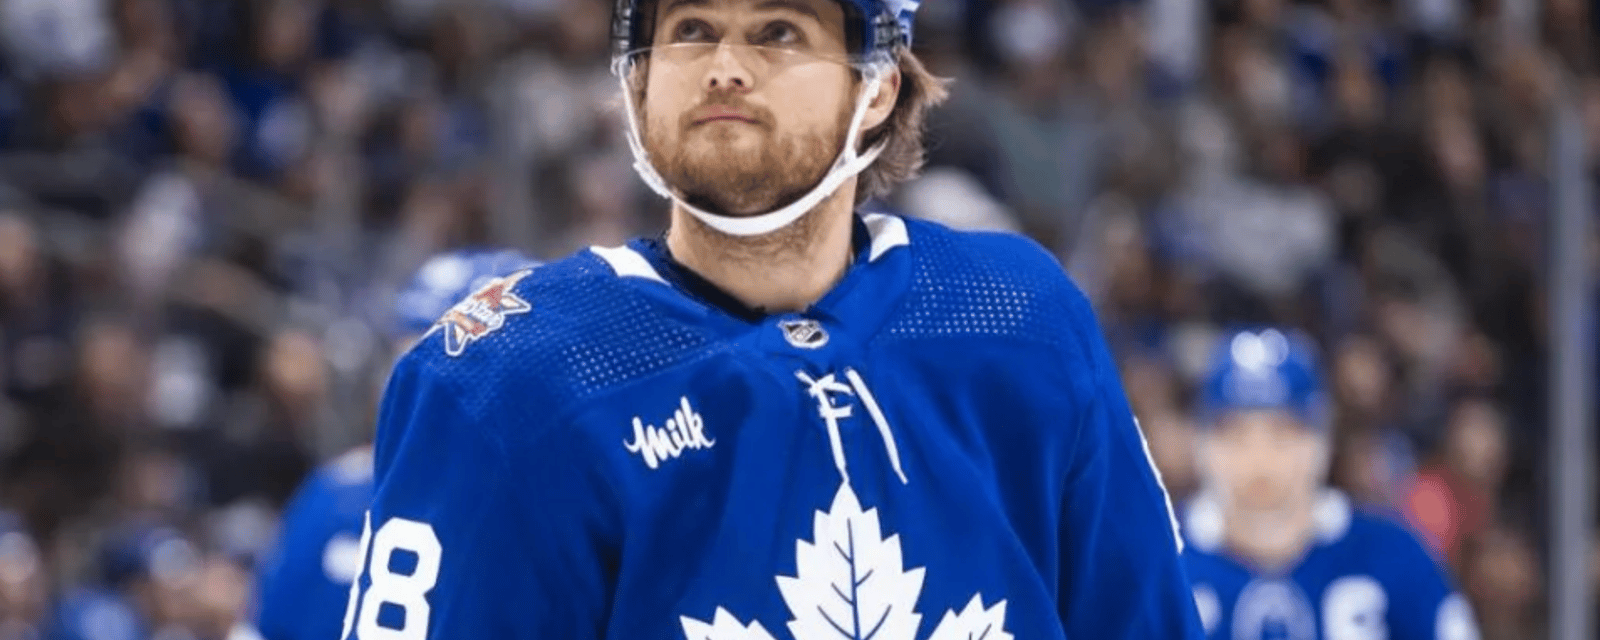 Leafs fans have varied reaction to Nylander's extension